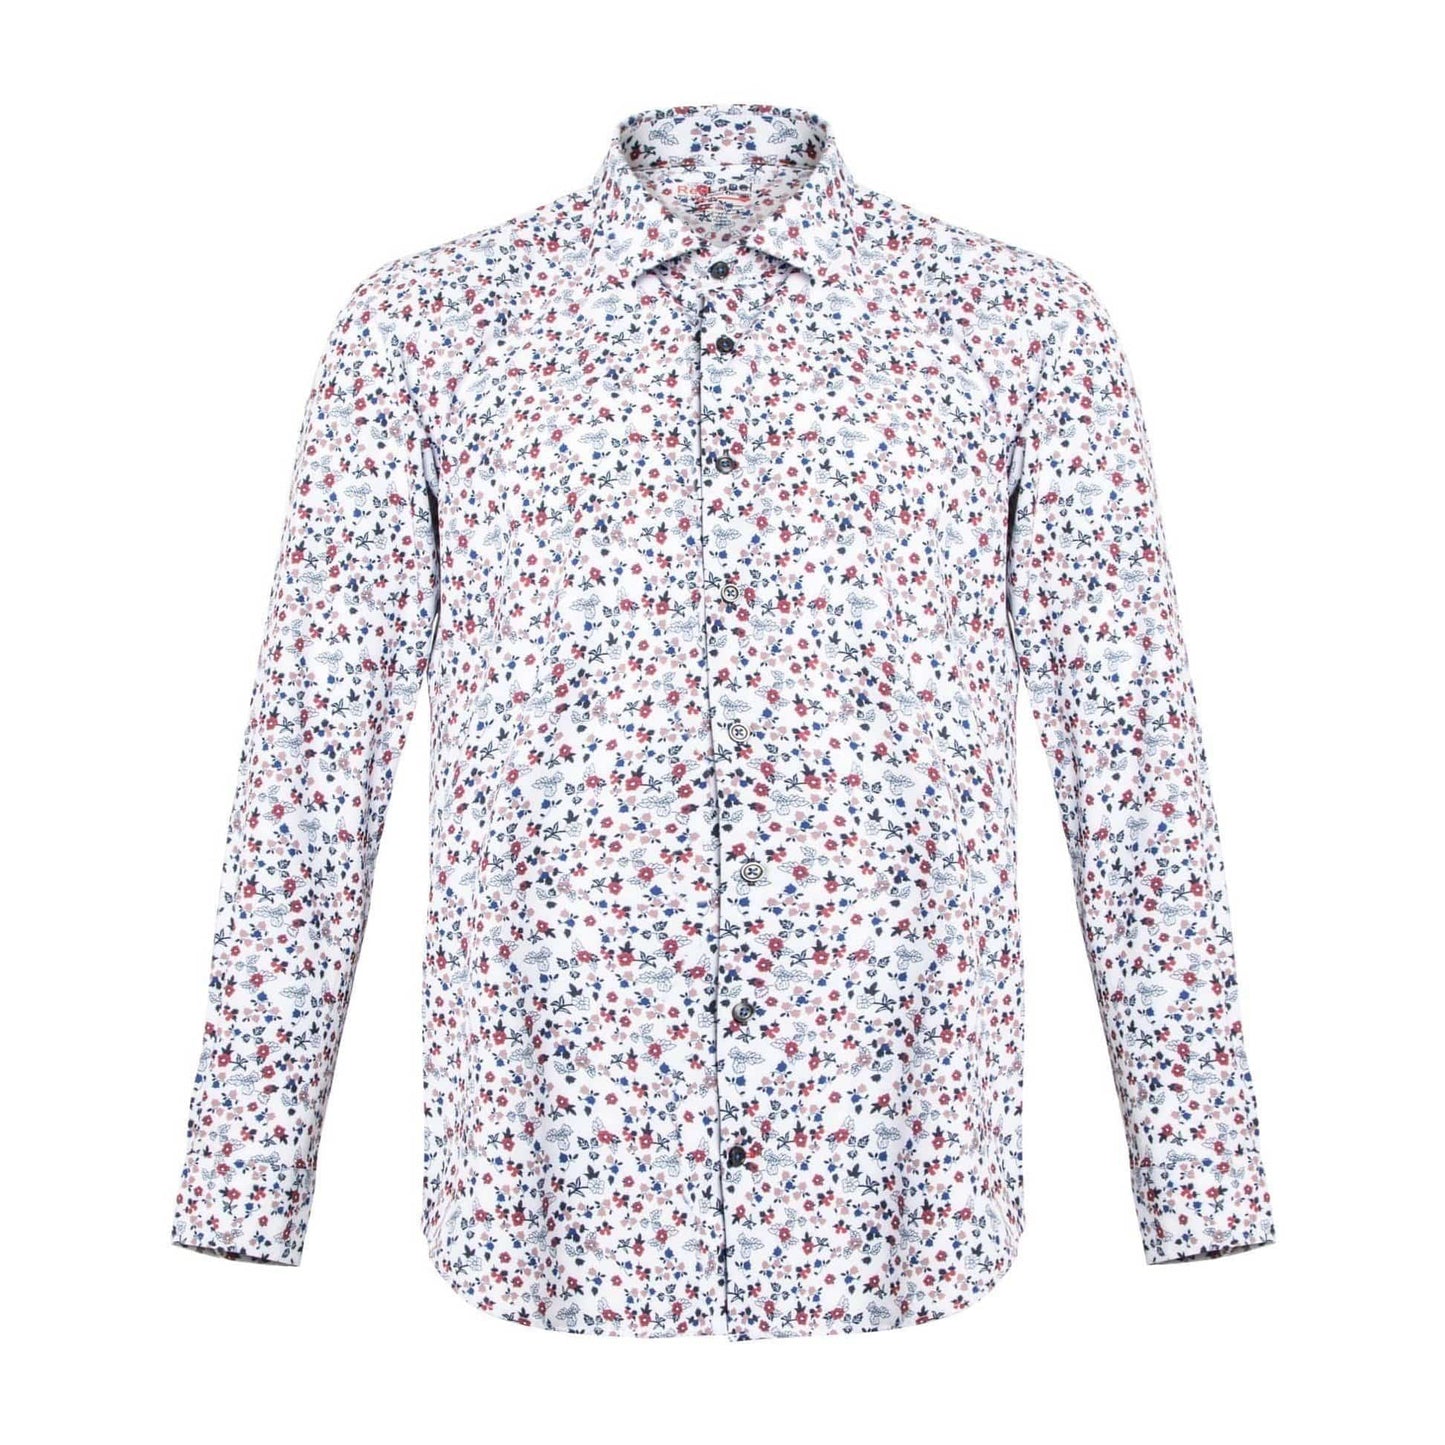 Leo Chevalier Design Flower Print Voyage Performance Fitted Long Sleeve Shirts Leo Chevalier